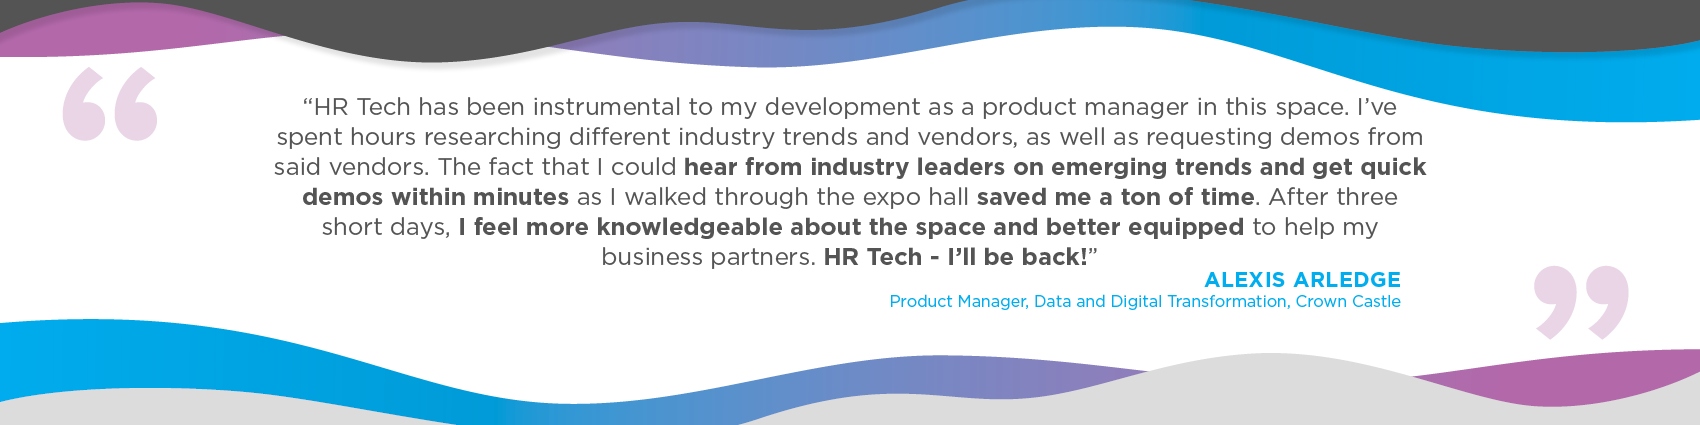 “HR Tech has been instrumental to my development as a product manager in this space. I've spent hours researching different industry trends and vendors, as well as requesting demos from said vendors. The fact that I could hear from industry leaders on emerging trends and get quick demos within minutes as I walked through the expo hall saved me a ton of time. After three short days, I feel more knowledgeable about the space and better equipped to help my business partners. HR Tech - I'll be back!
Aleix Arledge
Product Manager, Data and Digital Transformation
Crown Castle